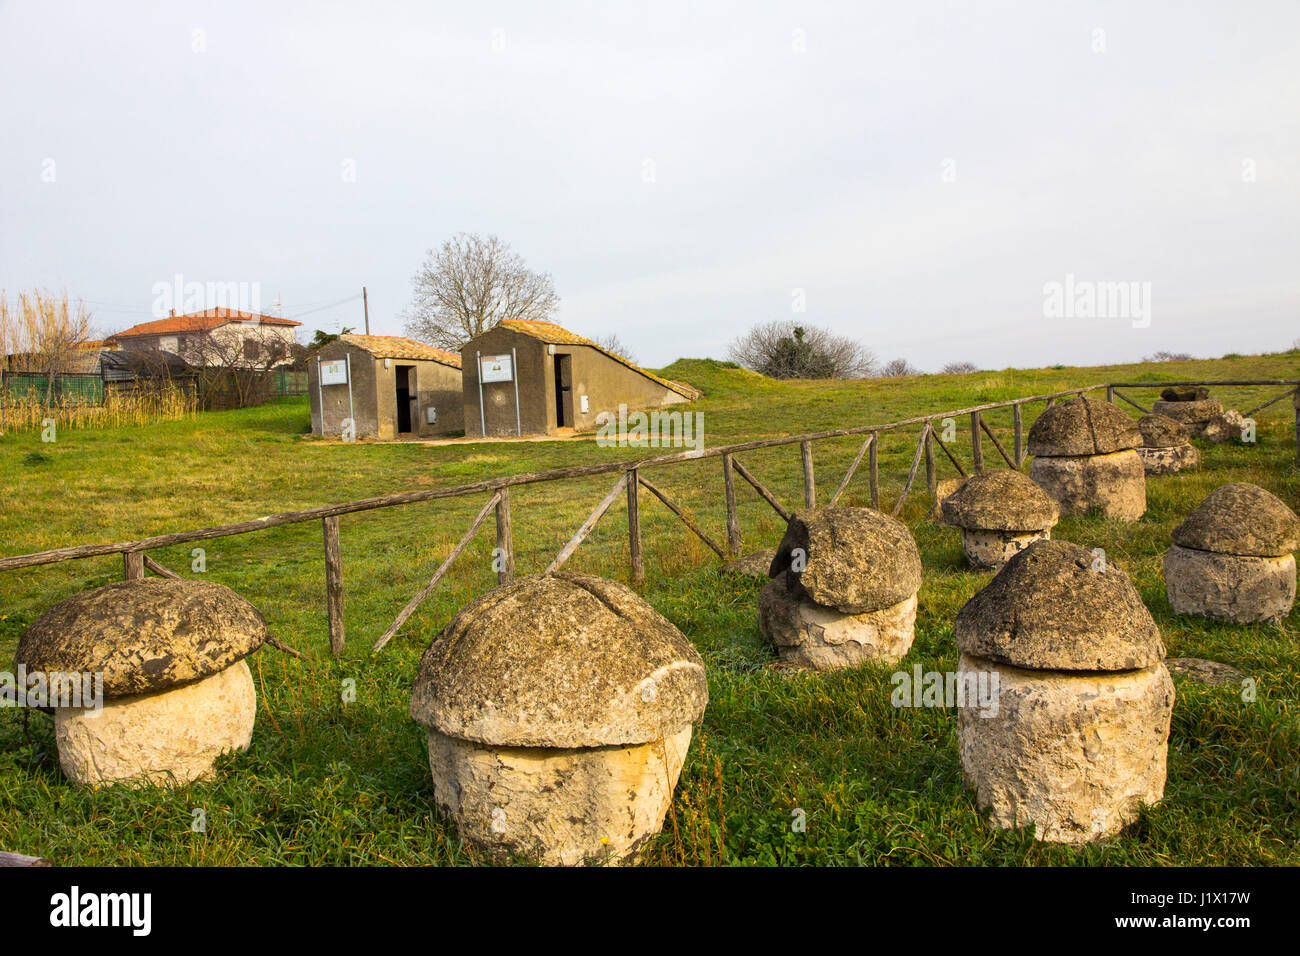 Simple round tombs carved from rock for cremation burials during the Villanovan period around the 9th Century BC can be seen at Monterozzi Necropolis  Stock Photo